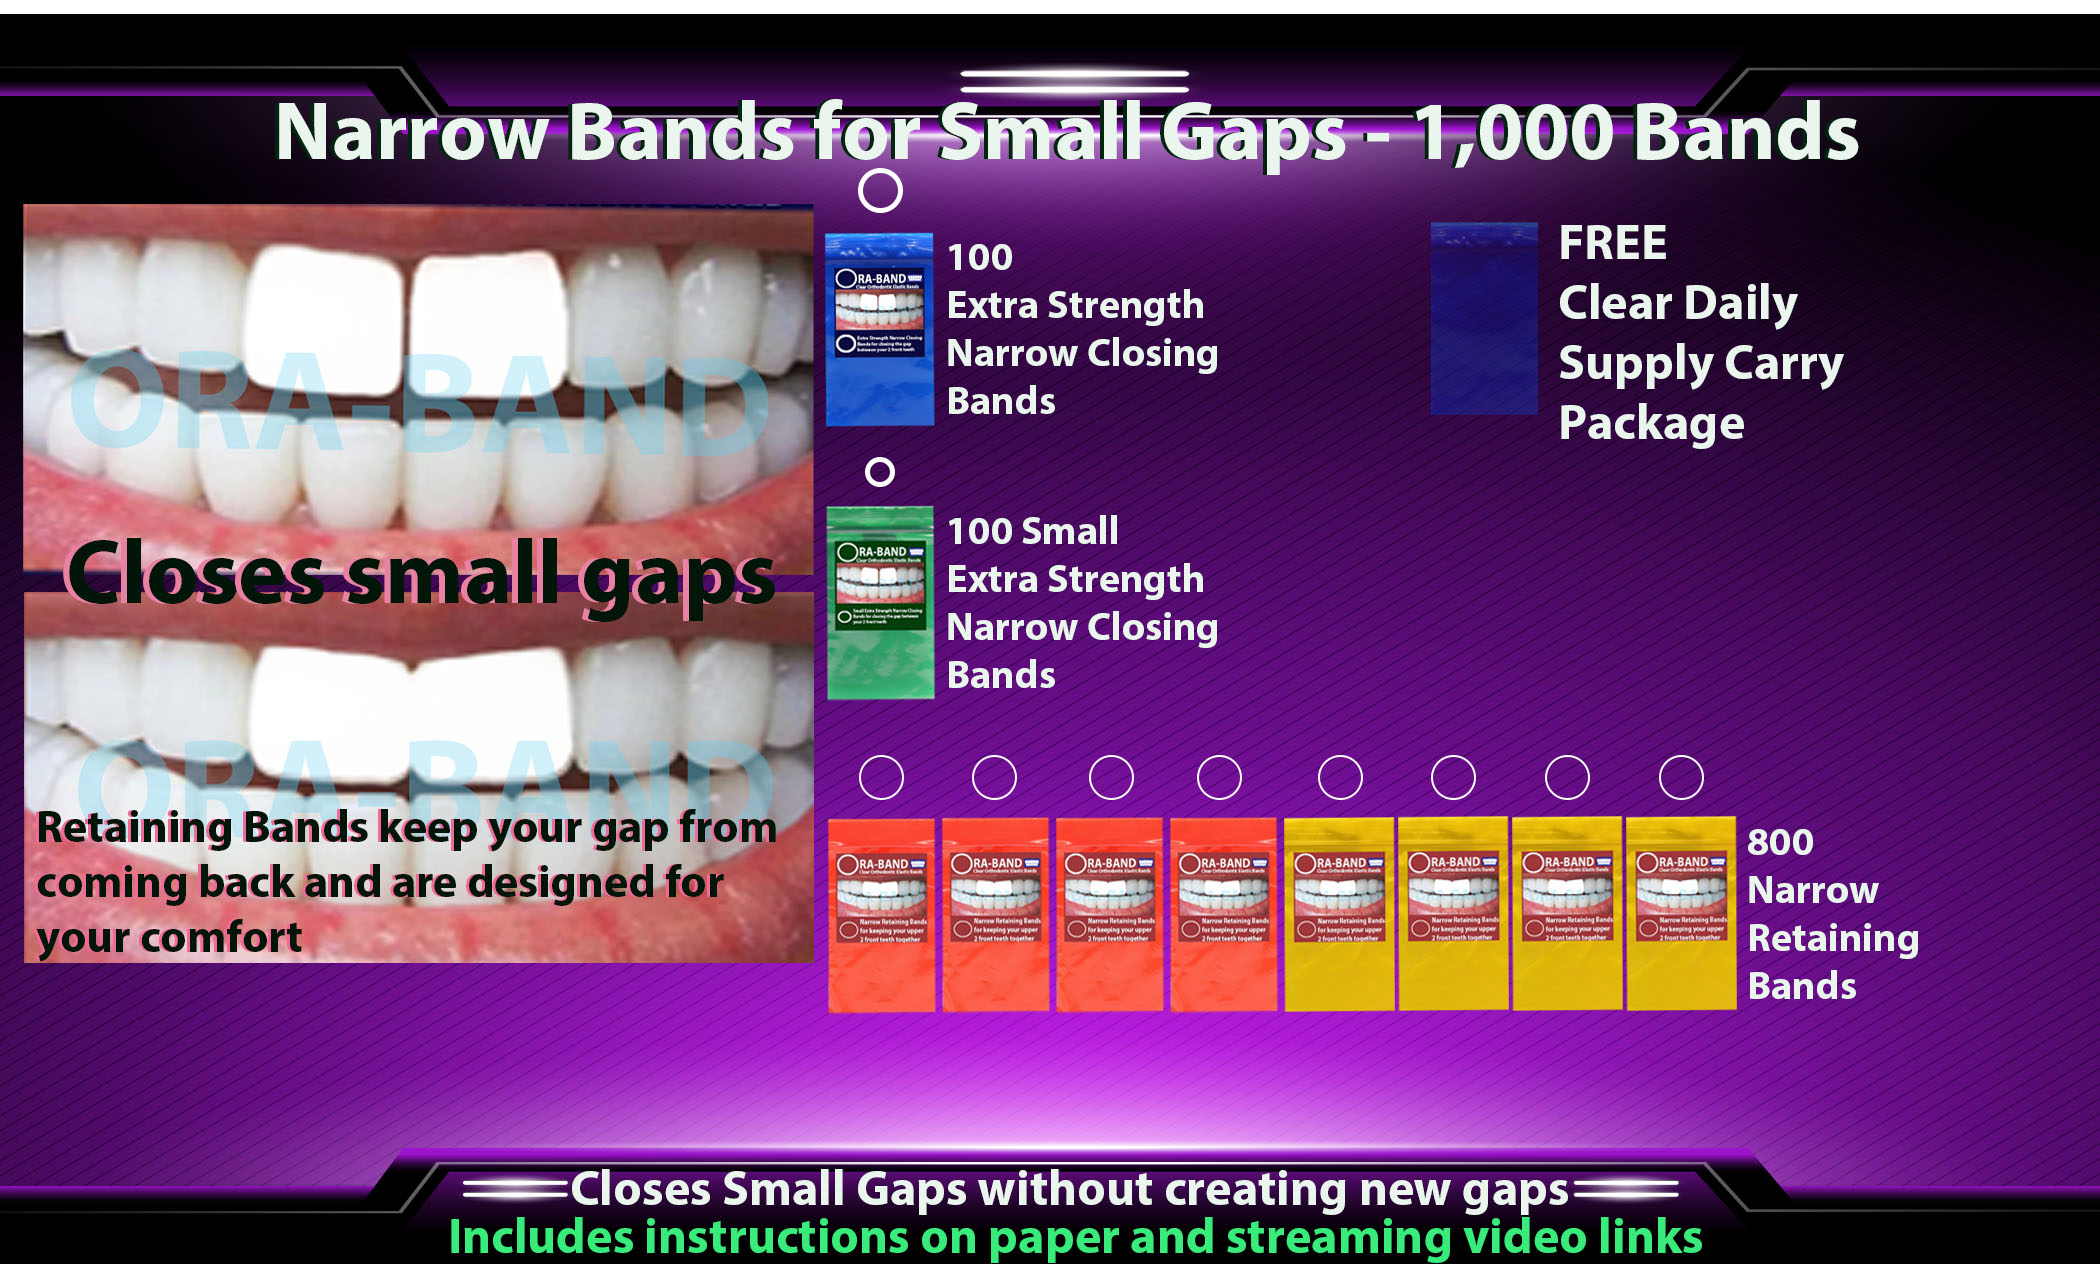 ORA-BAND 1,000 Band Narrow Bands Package for 
Small Gaps between your 2 front teeth